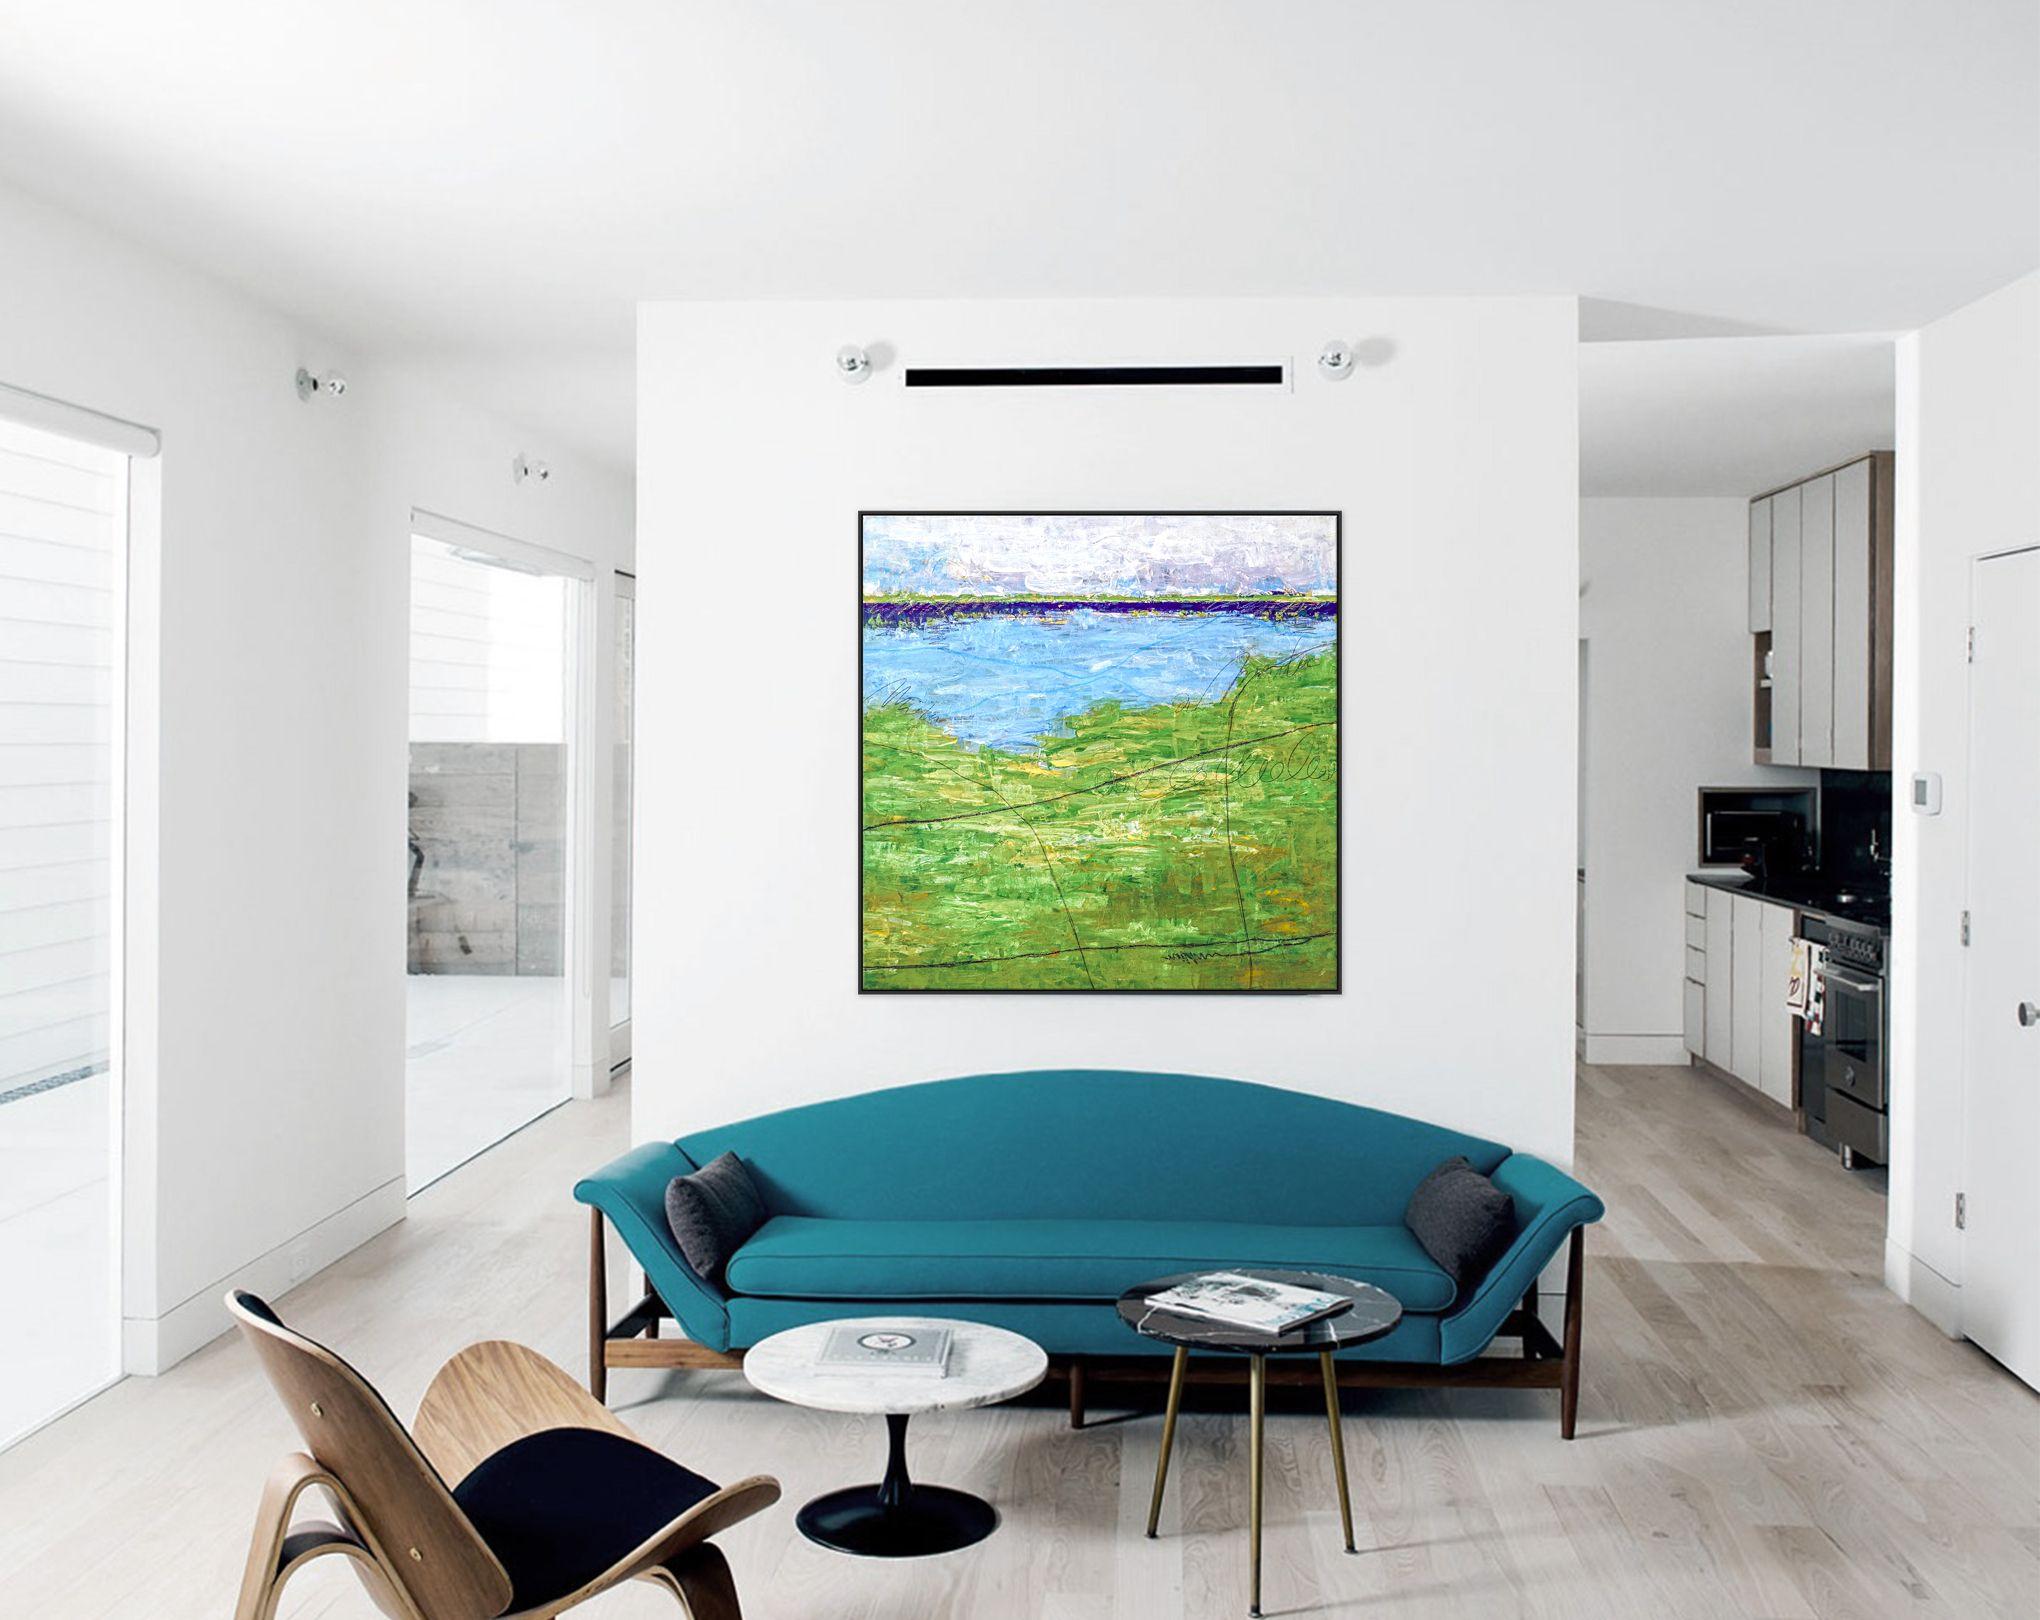 A painting of sky, lake and green fields, a simple landscape of summer in green field in contemporary style. â€¢ PICTURE HANGER ATTACHED: Yes â€¢ SIDES PAINTED: Yes â€¢ READY TO HANG: No (Rolled in tube) â€¢ ARTIST SIGNED: Yes â€¢ CERTIFICATE OF